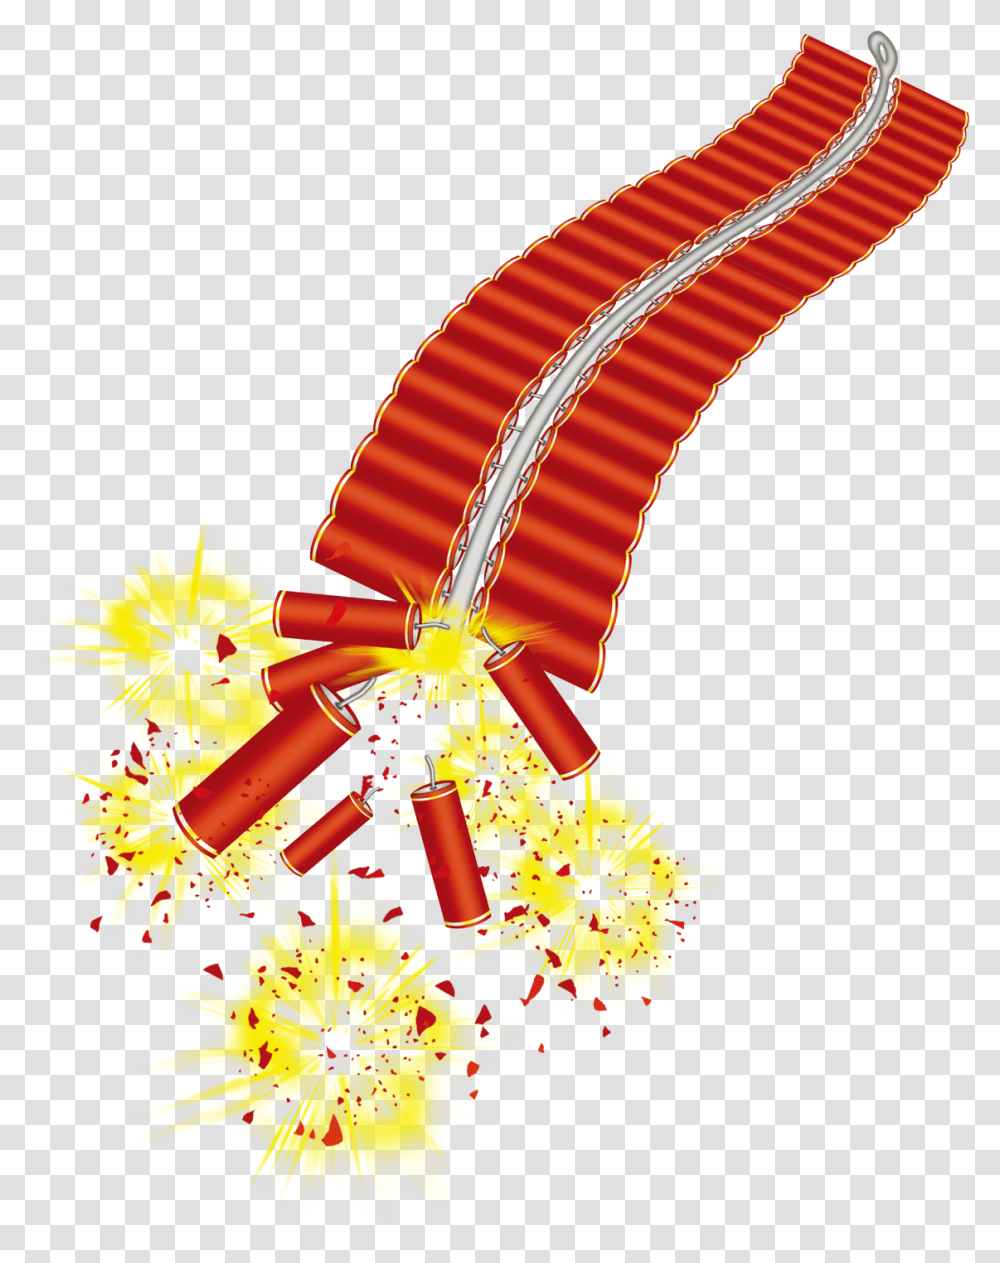 Diwali Firecrackers Image Free Download Chinese New Year Firecracker Transparent Png